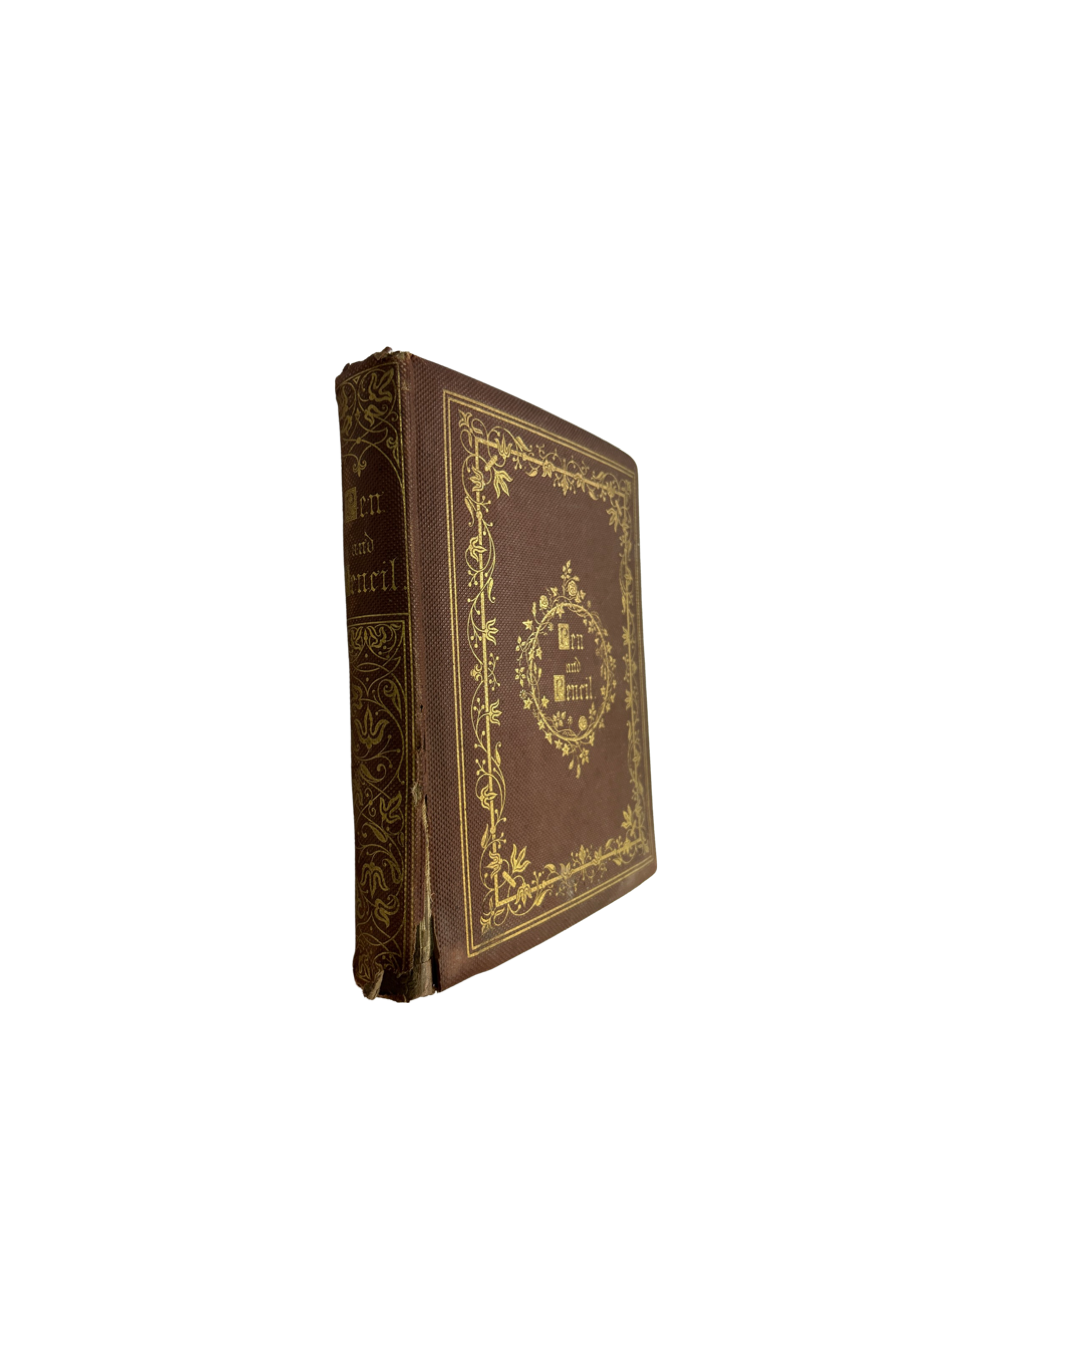 1st Ed. Pen & Pencil by Mrs. Mary Balmanno, 1857